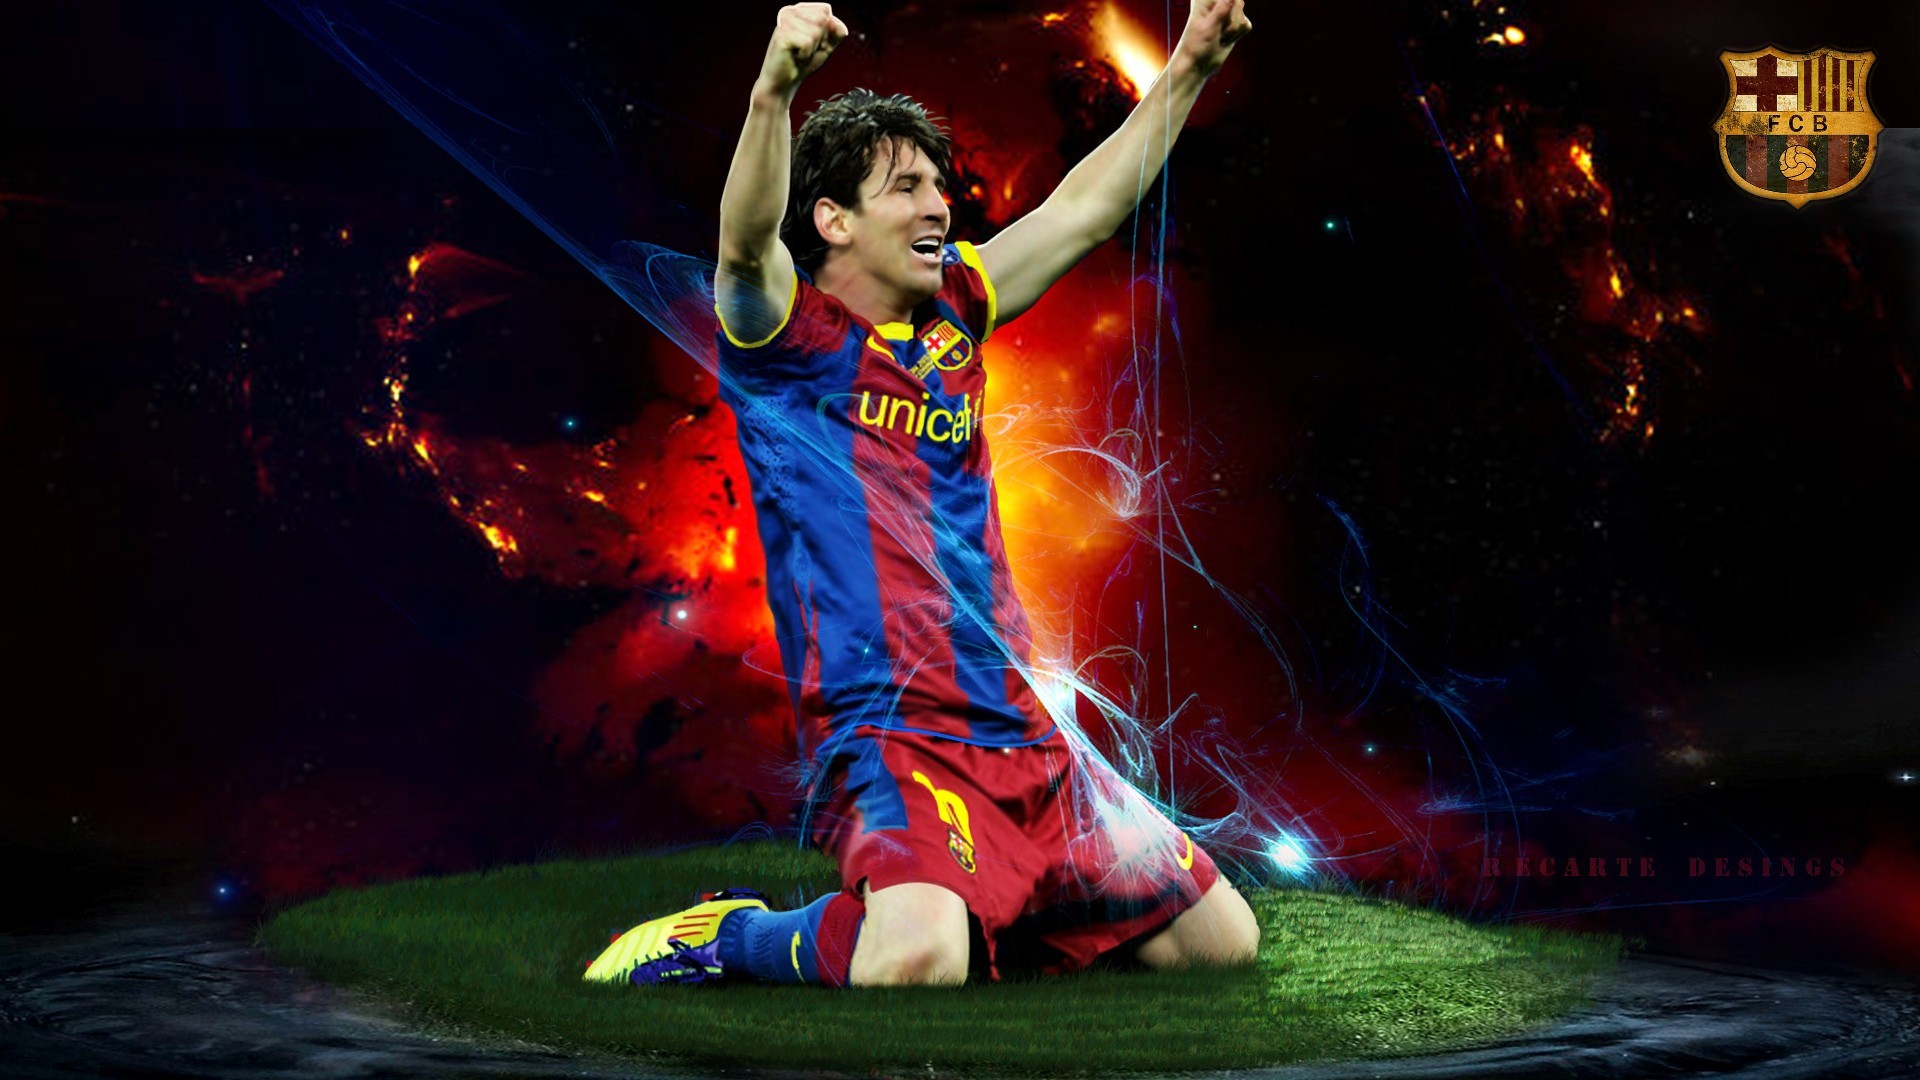 HD Messi Wallpapers With Resolution 1920X1080 pixel. You can make this wallpaper for your Mac or Windows Desktop Background, iPhone, Android or Tablet and another Smartphone device for free